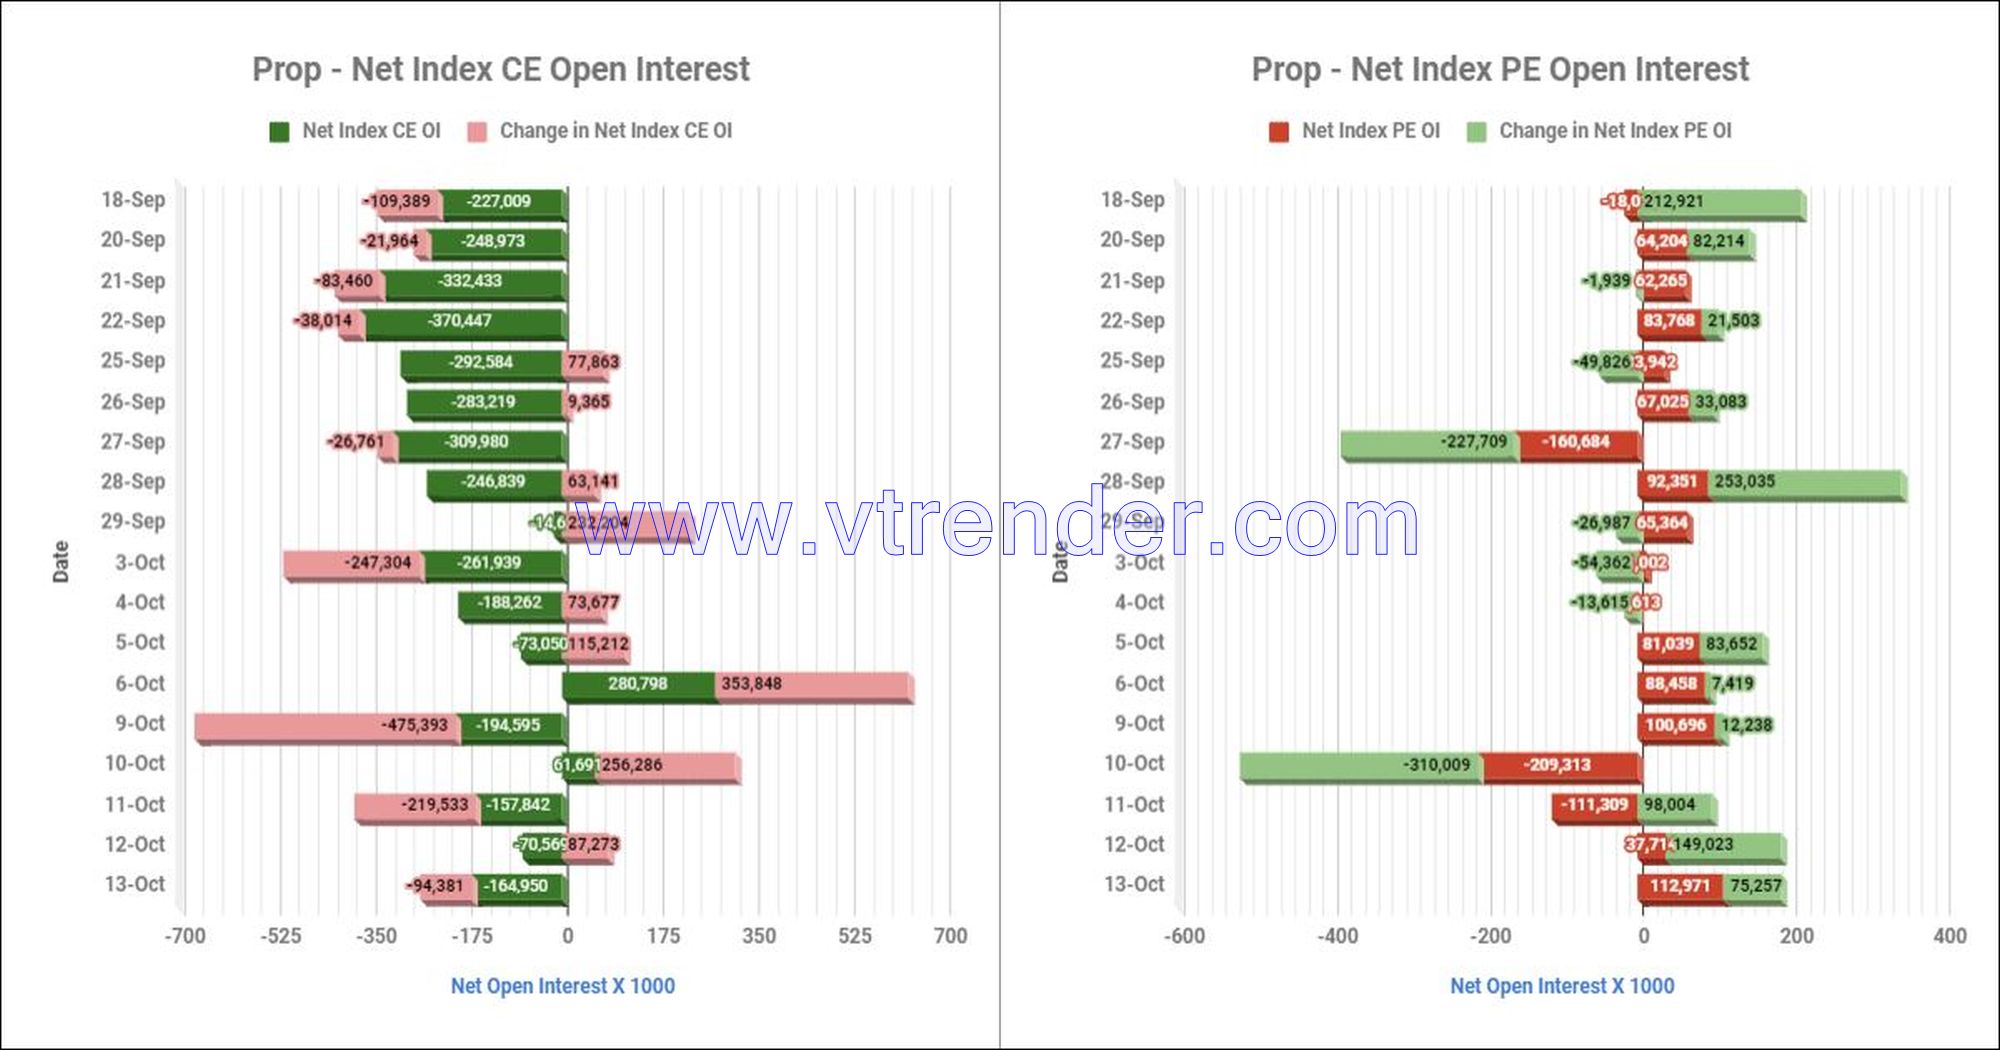 Proinop13Oct Participantwise Net Open Interest And Net Equity Investments – 13Th Oct 2023 Ce, Client, Dii, Fii, Index Futures, Index Options, Open Interest, Pe, Prop, Stocks Futures